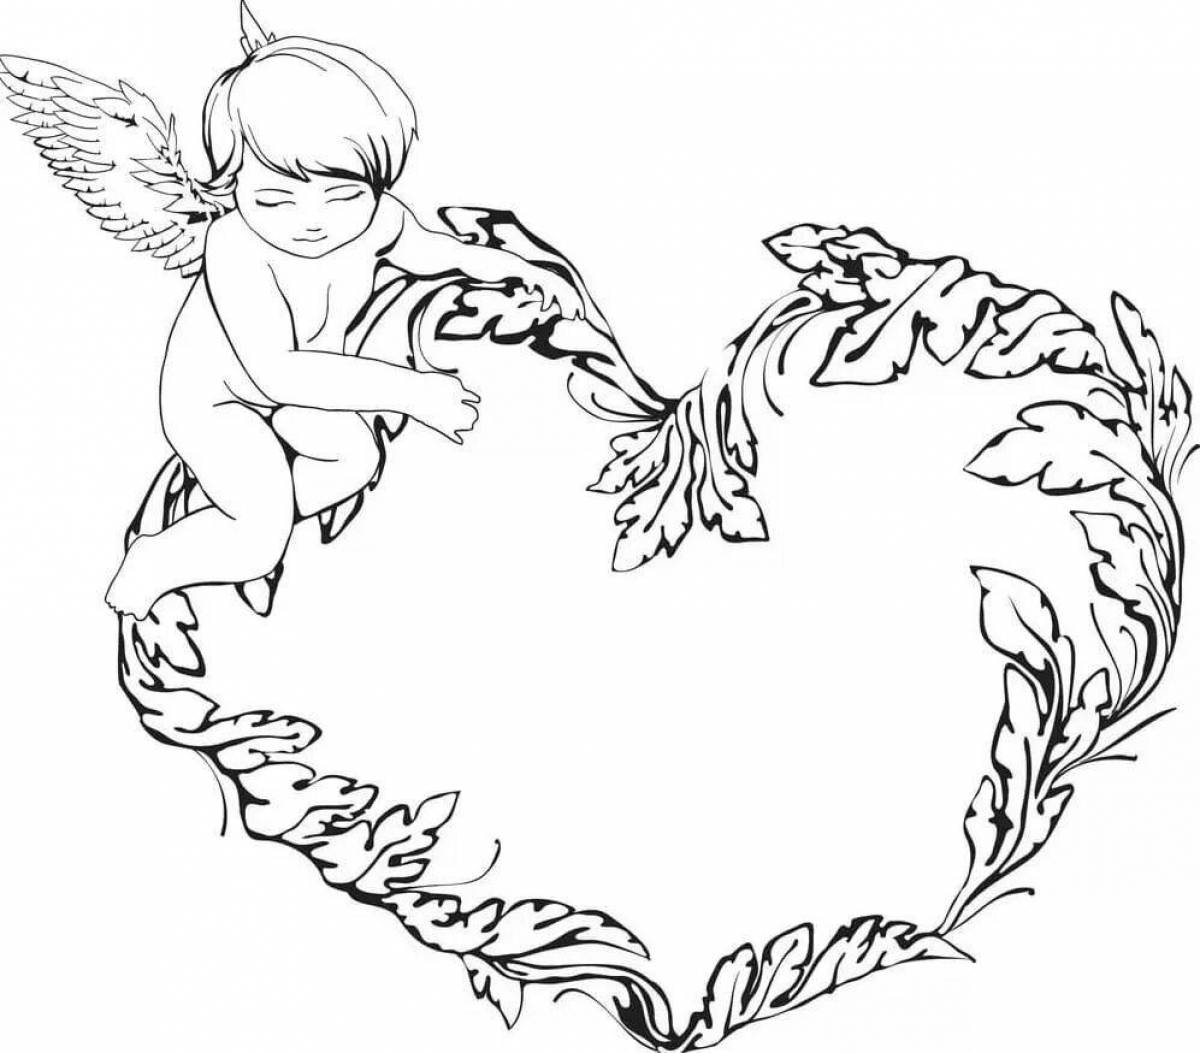 Coloring book mischievous cupid with heart